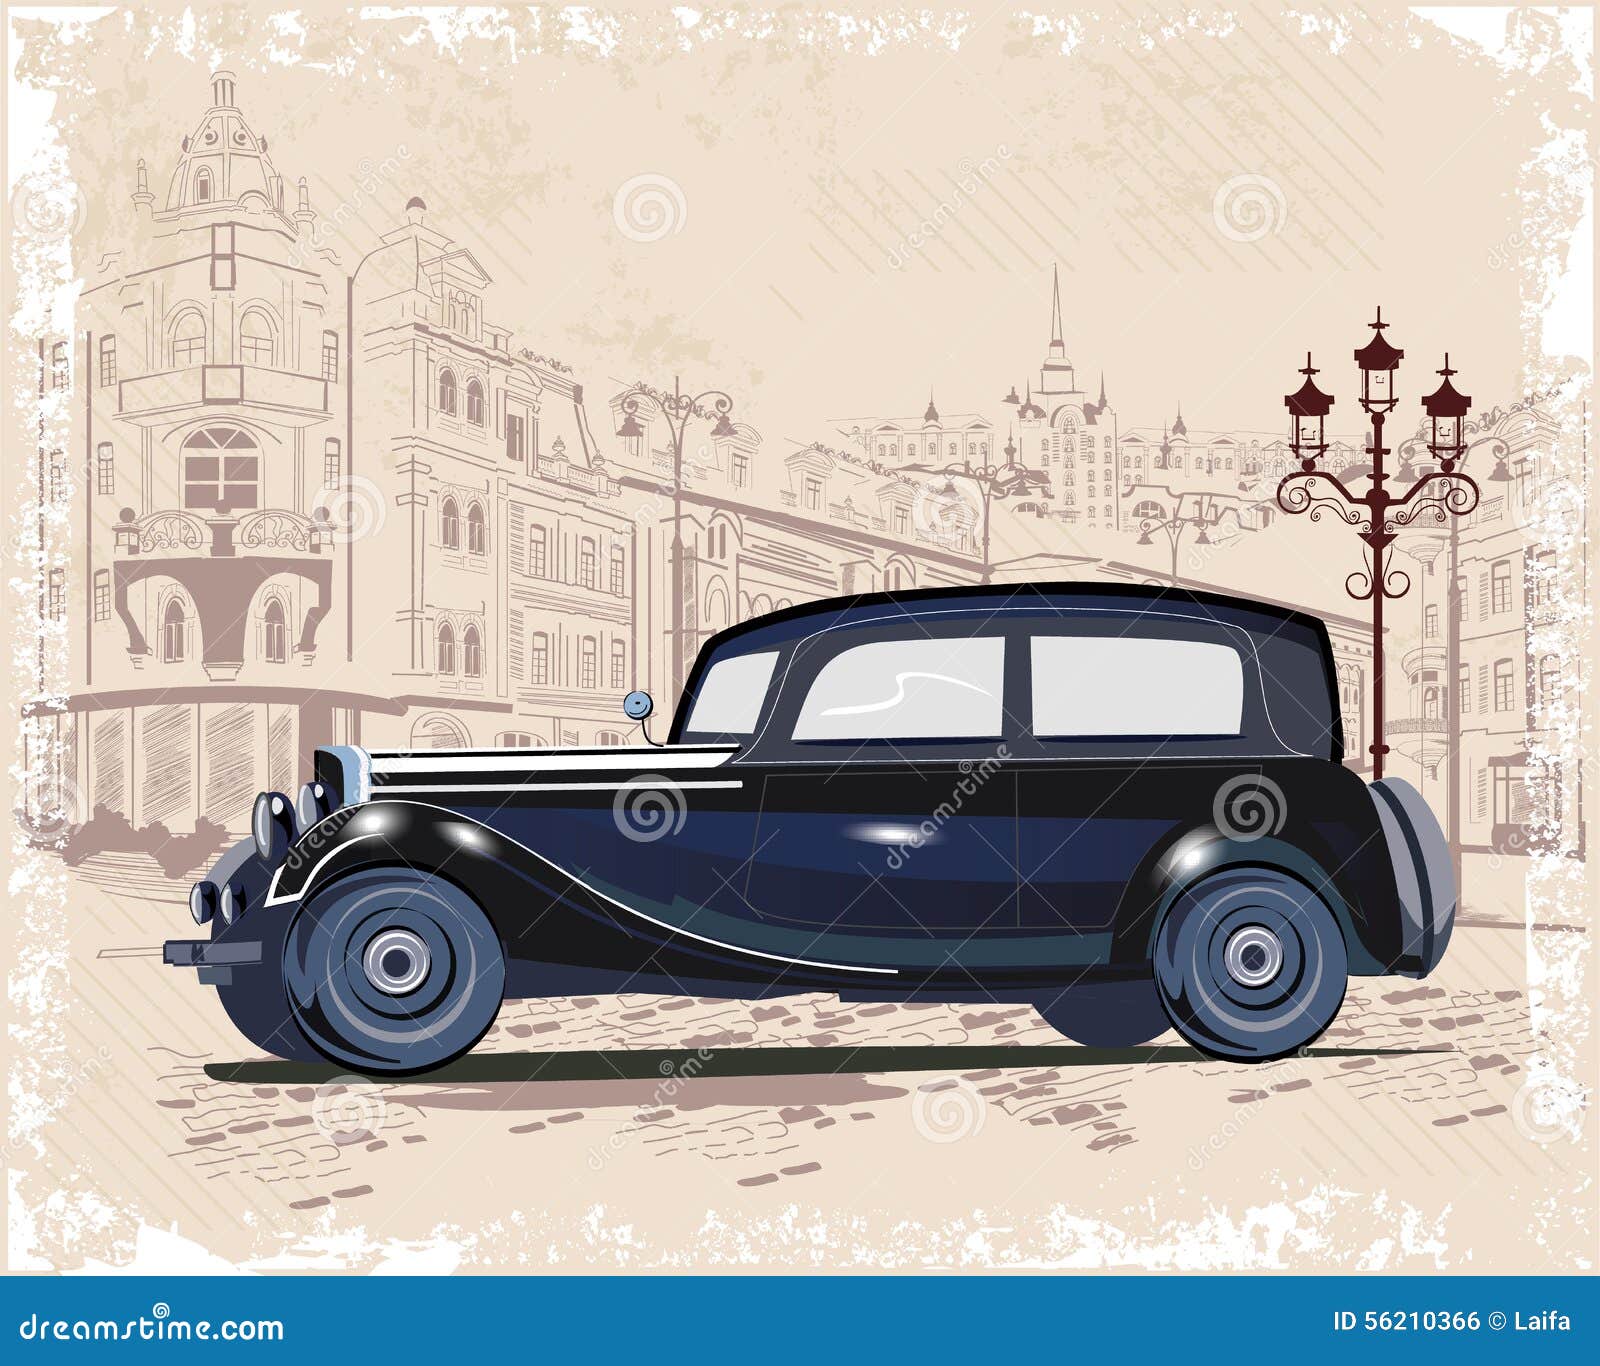 series of vintage backgrounds decorated with retro cars and old city street views.